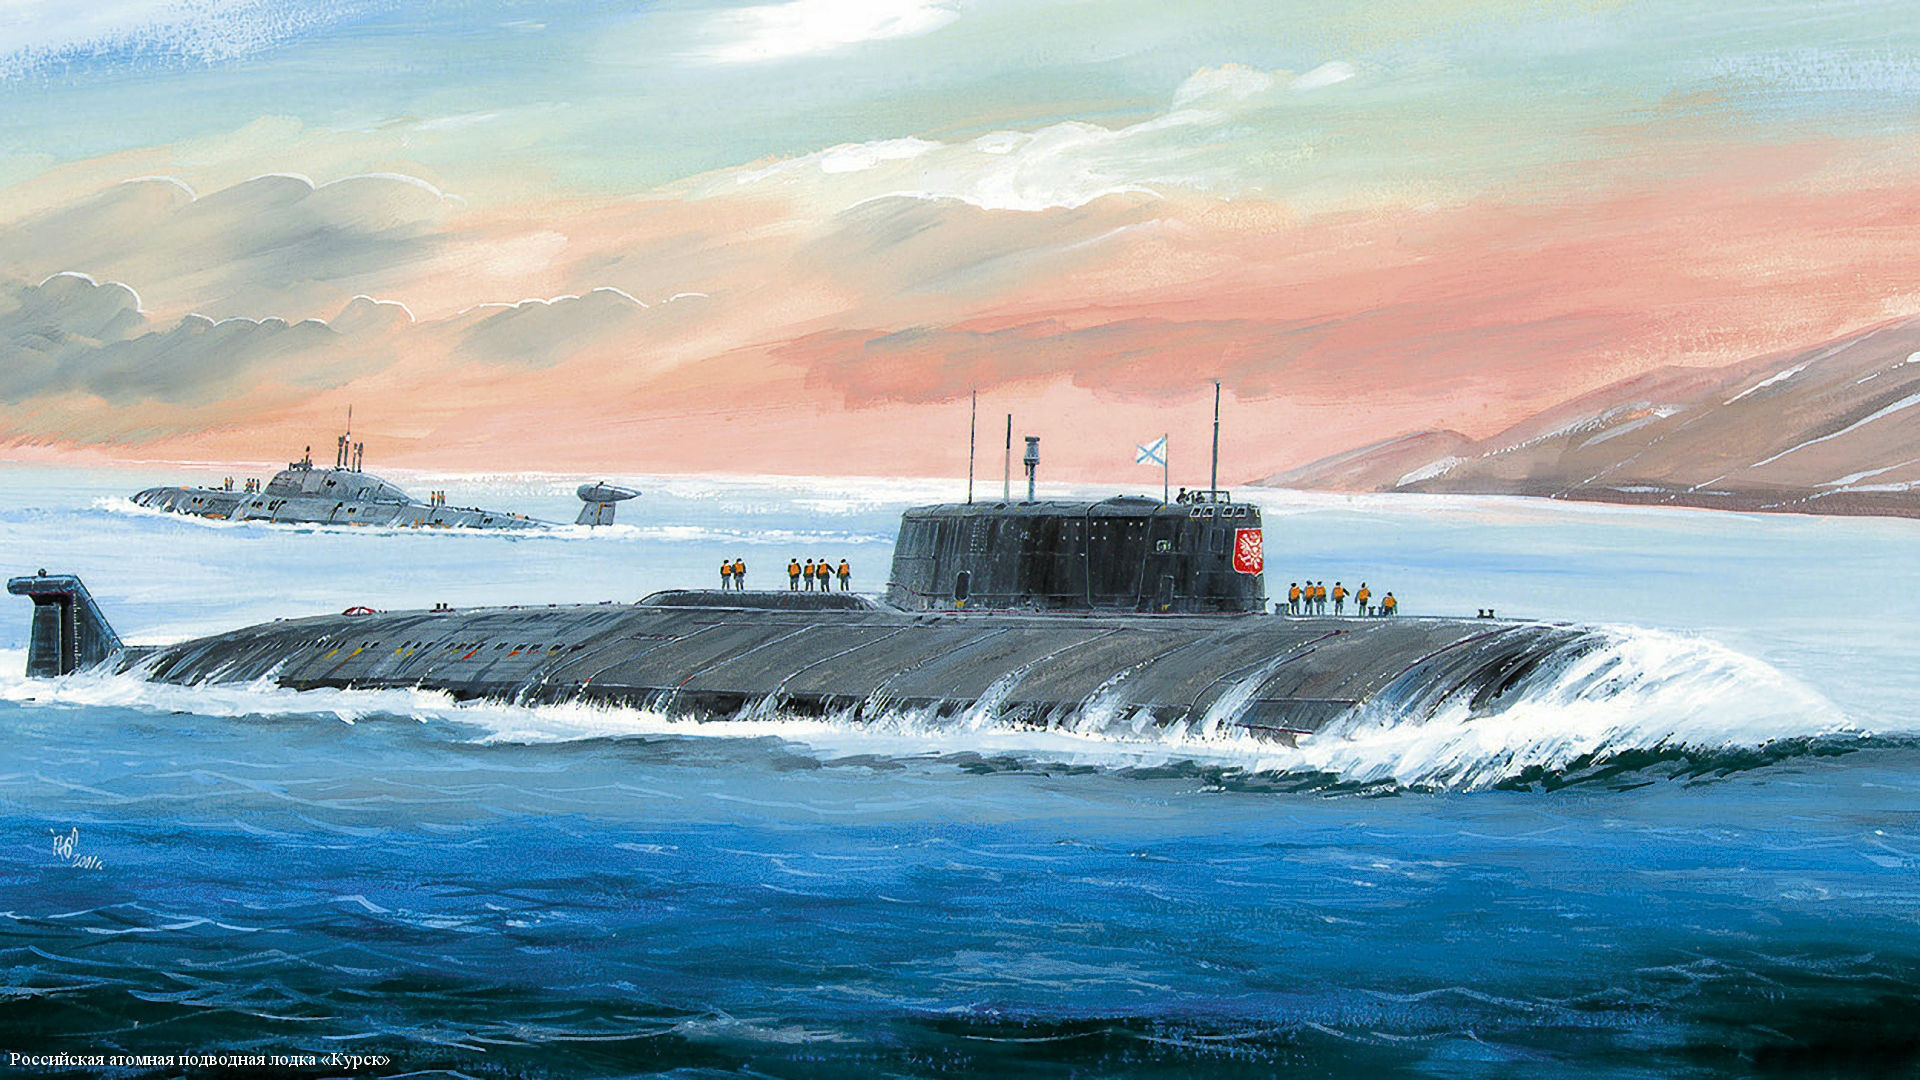 1920x1080 Submarine Kursk wallpapers and images wallpapers pictures photos 